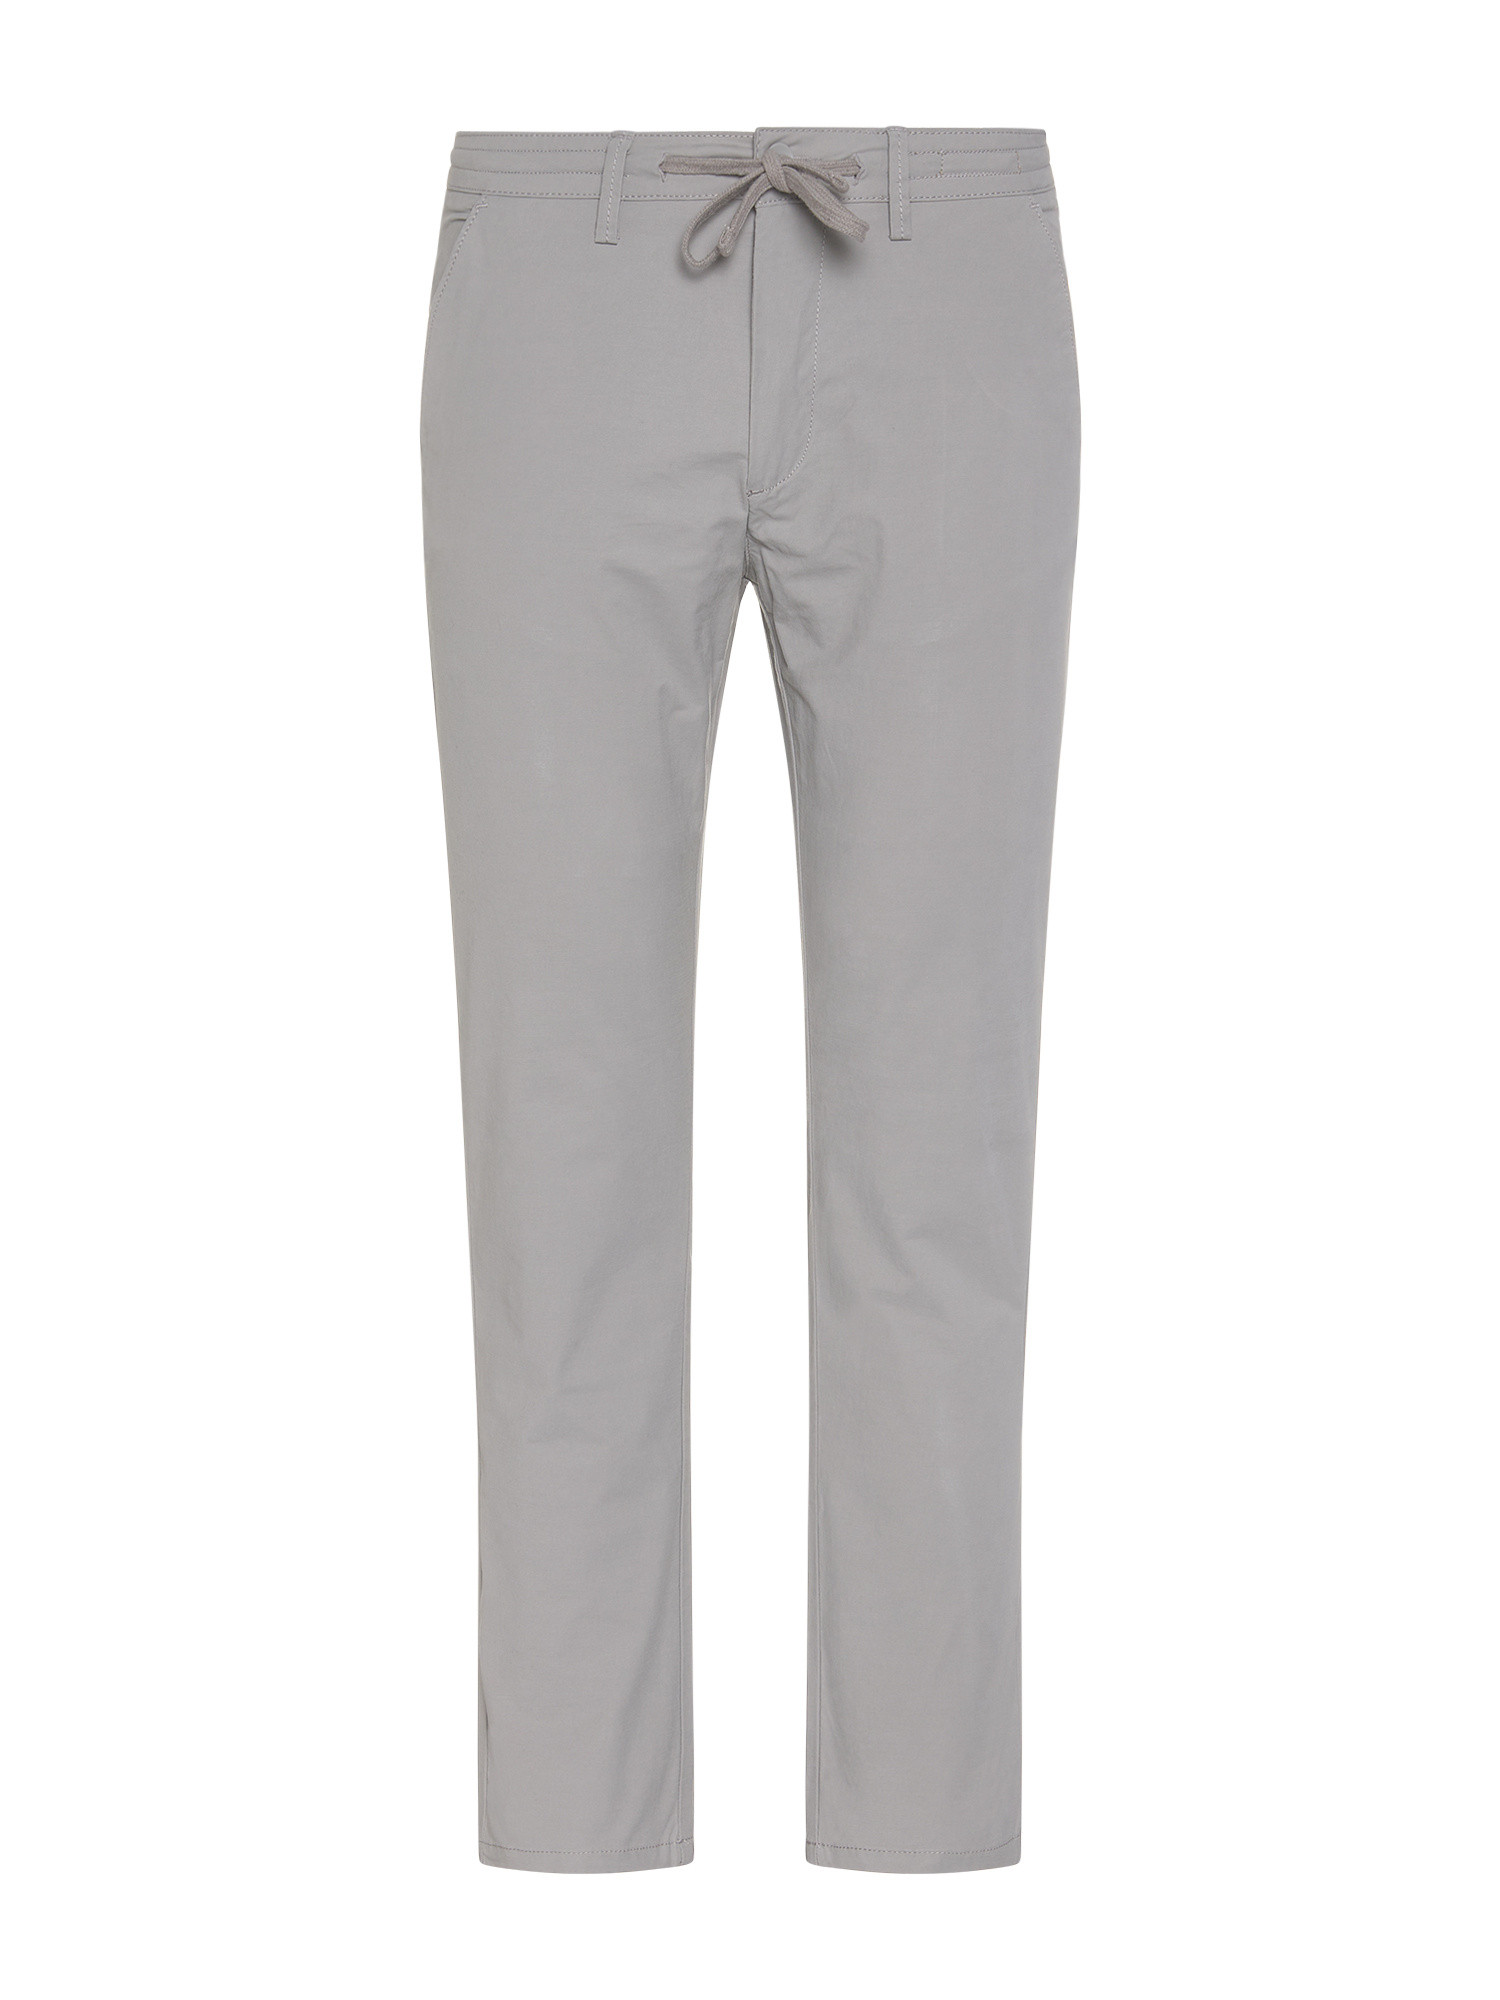 JCT - Jogger chino slim fit, Grigio, large image number 0